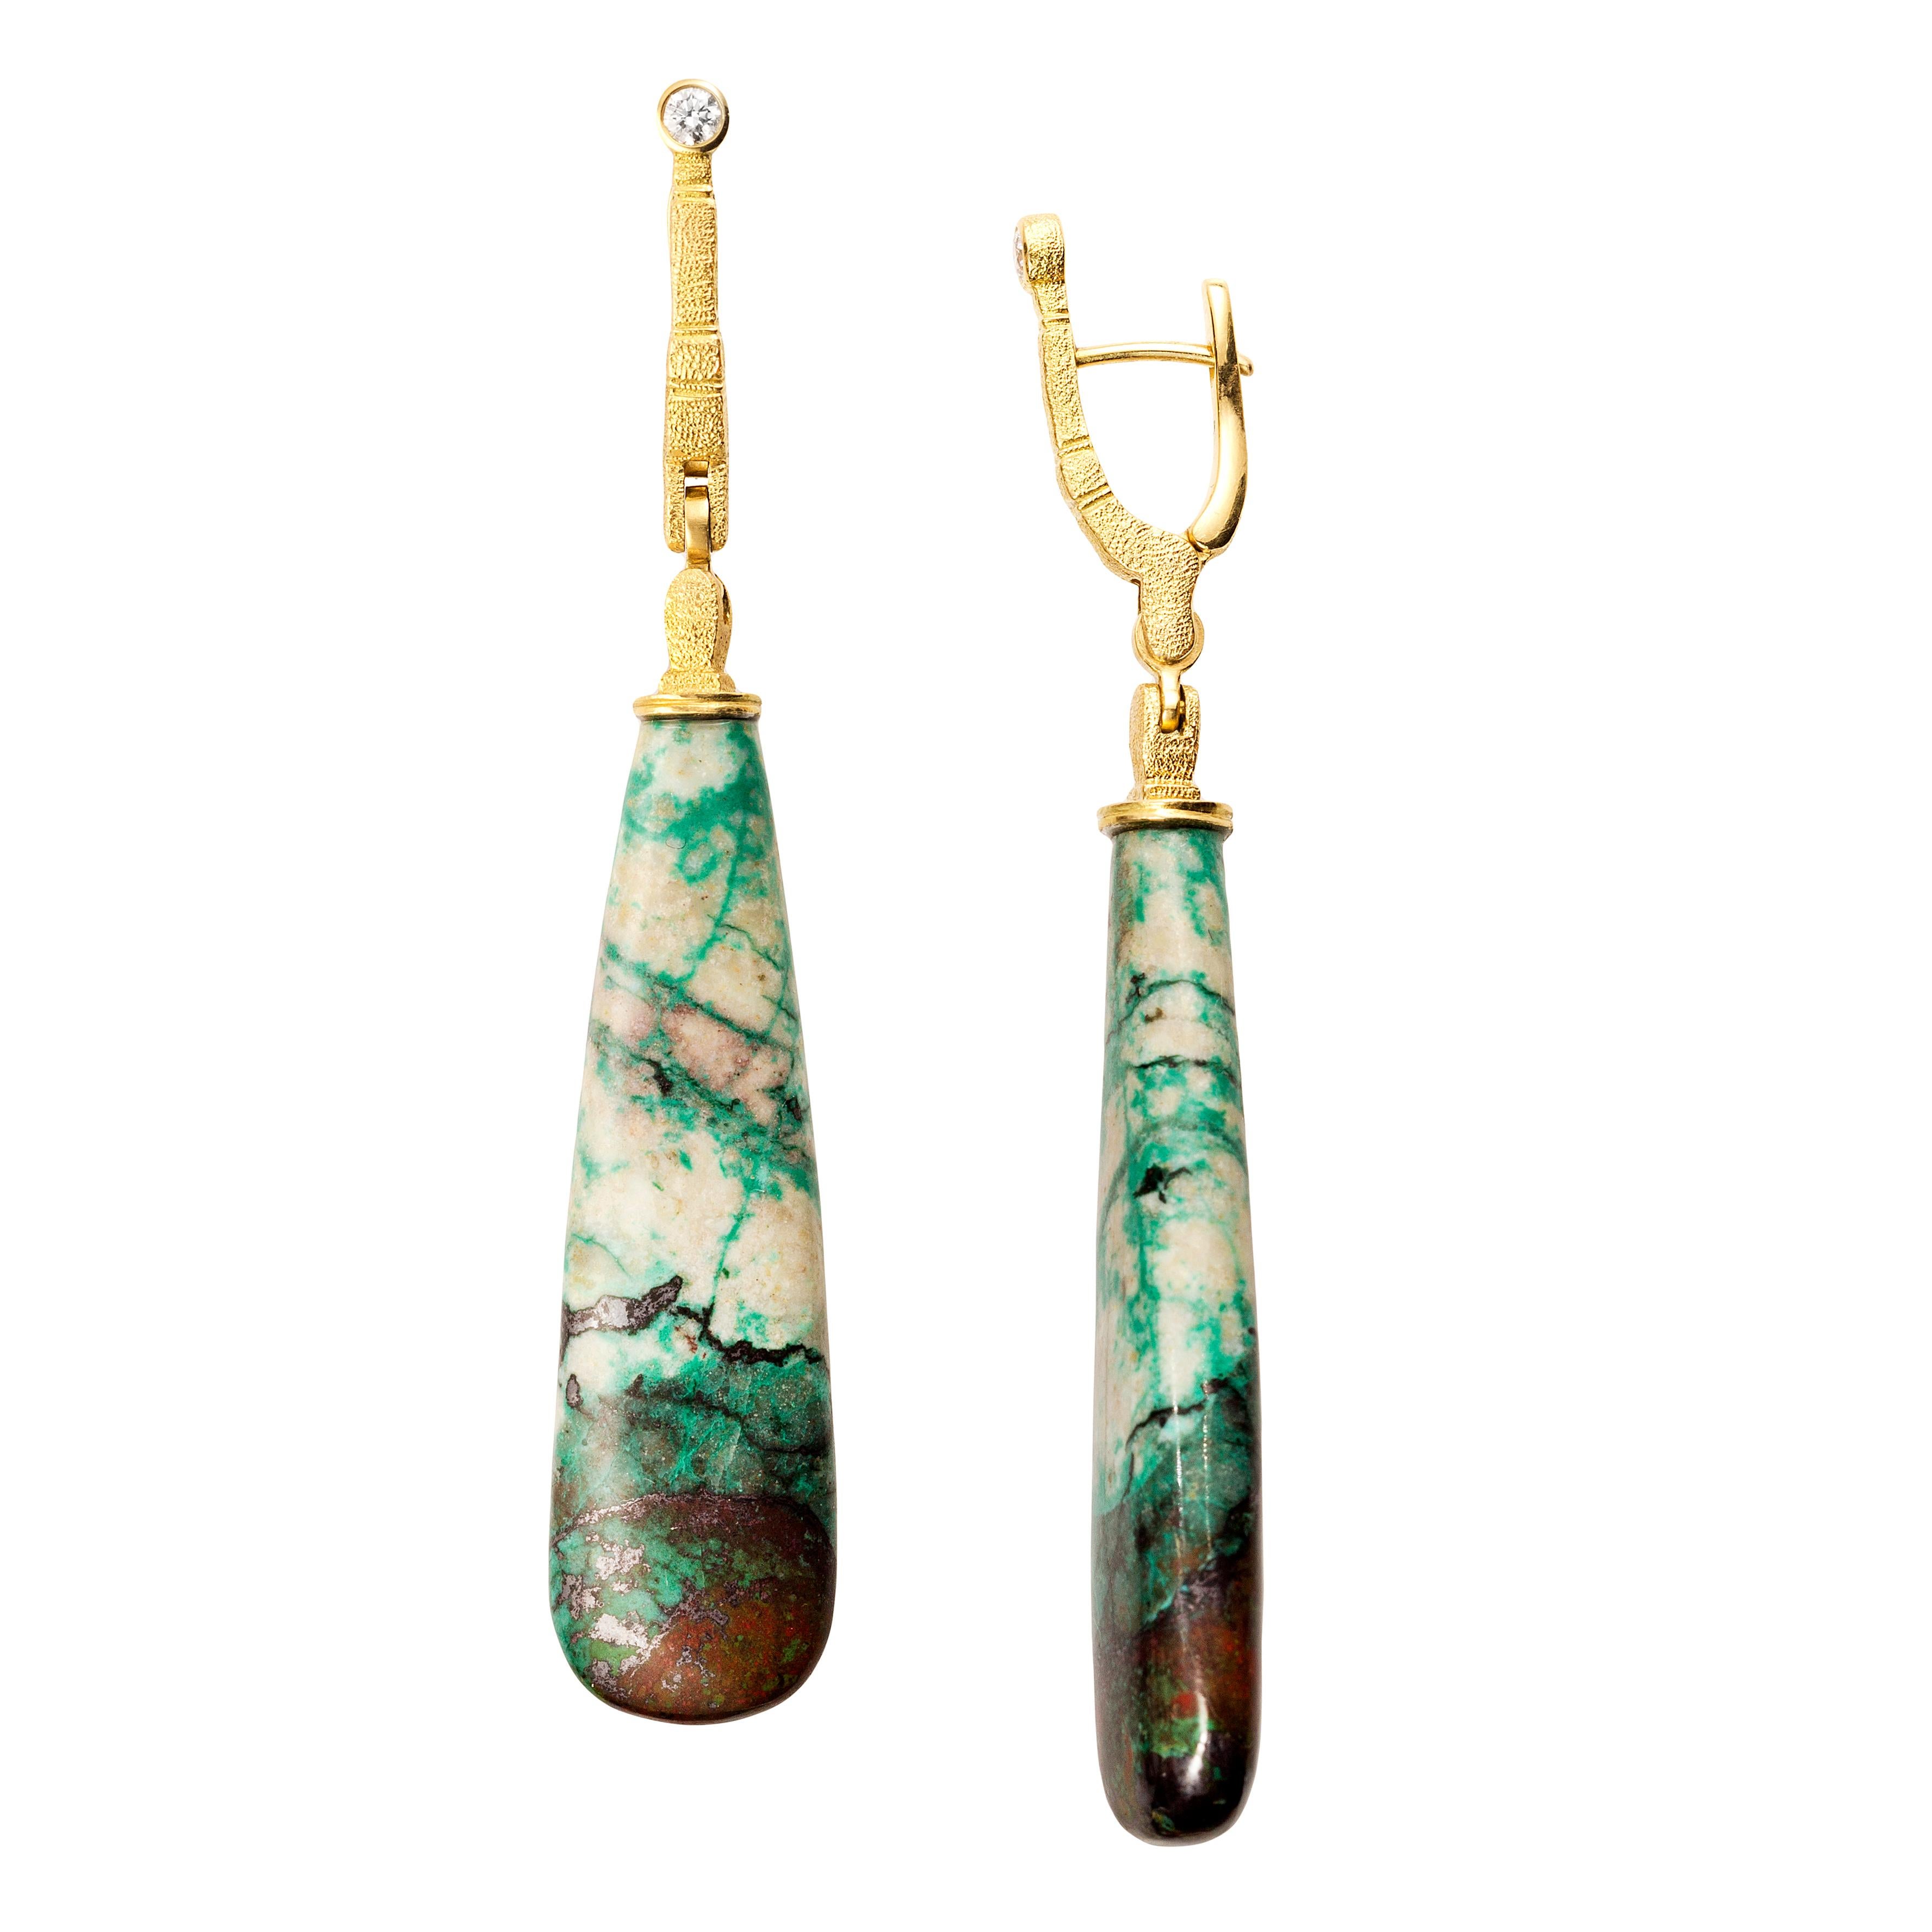 Contemporary Alex Sepkus 18 Karat Gold Sticks and Stones Earrings with Sonoran Sunrise Drops